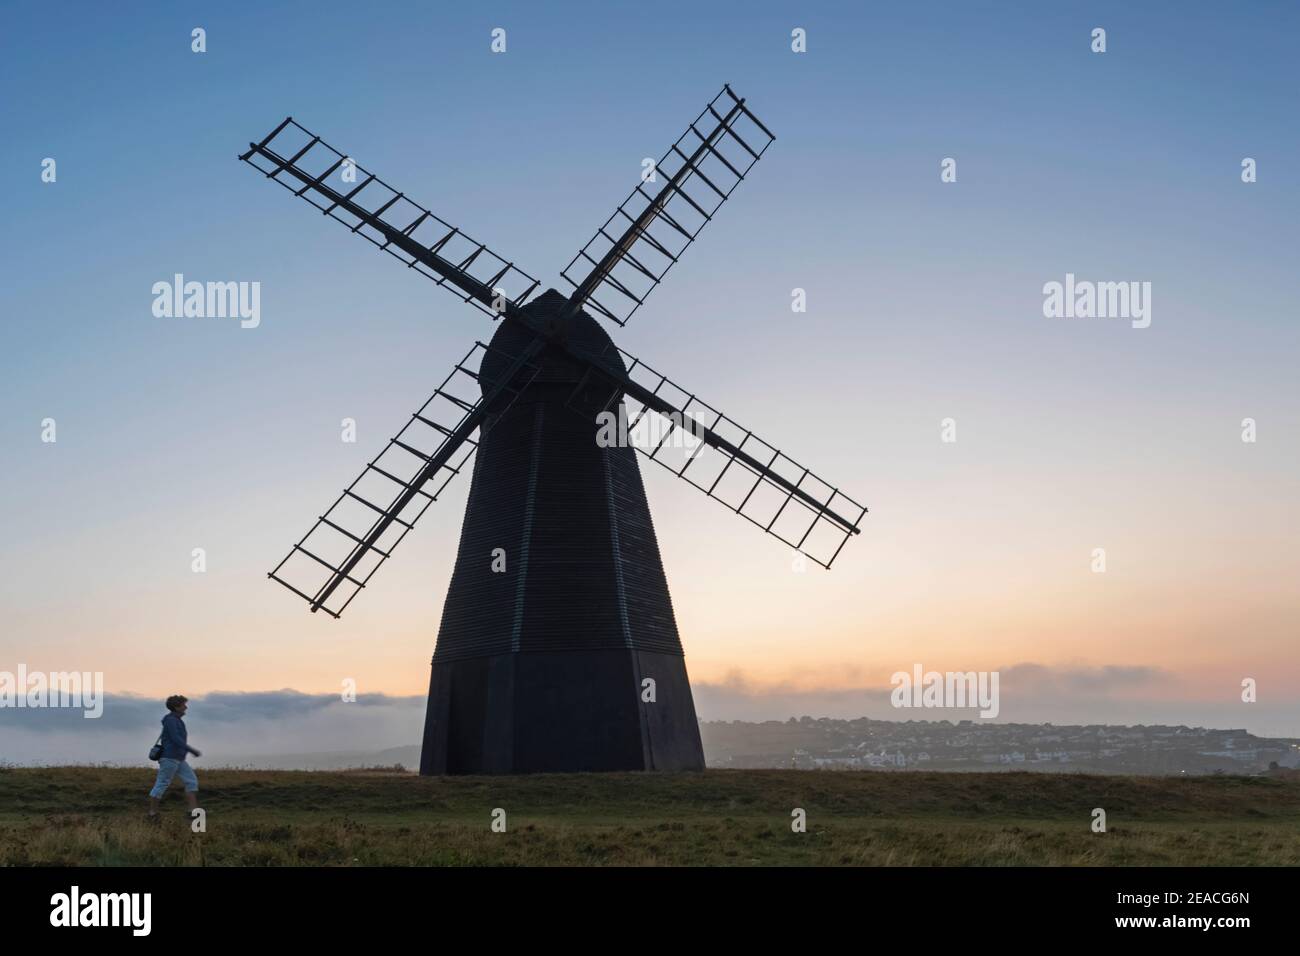 England, West Sussex, Brighton, Rottingdean, Silhouette of Rottingdean Windmill on Beacon Hill at Dawn Stock Photo